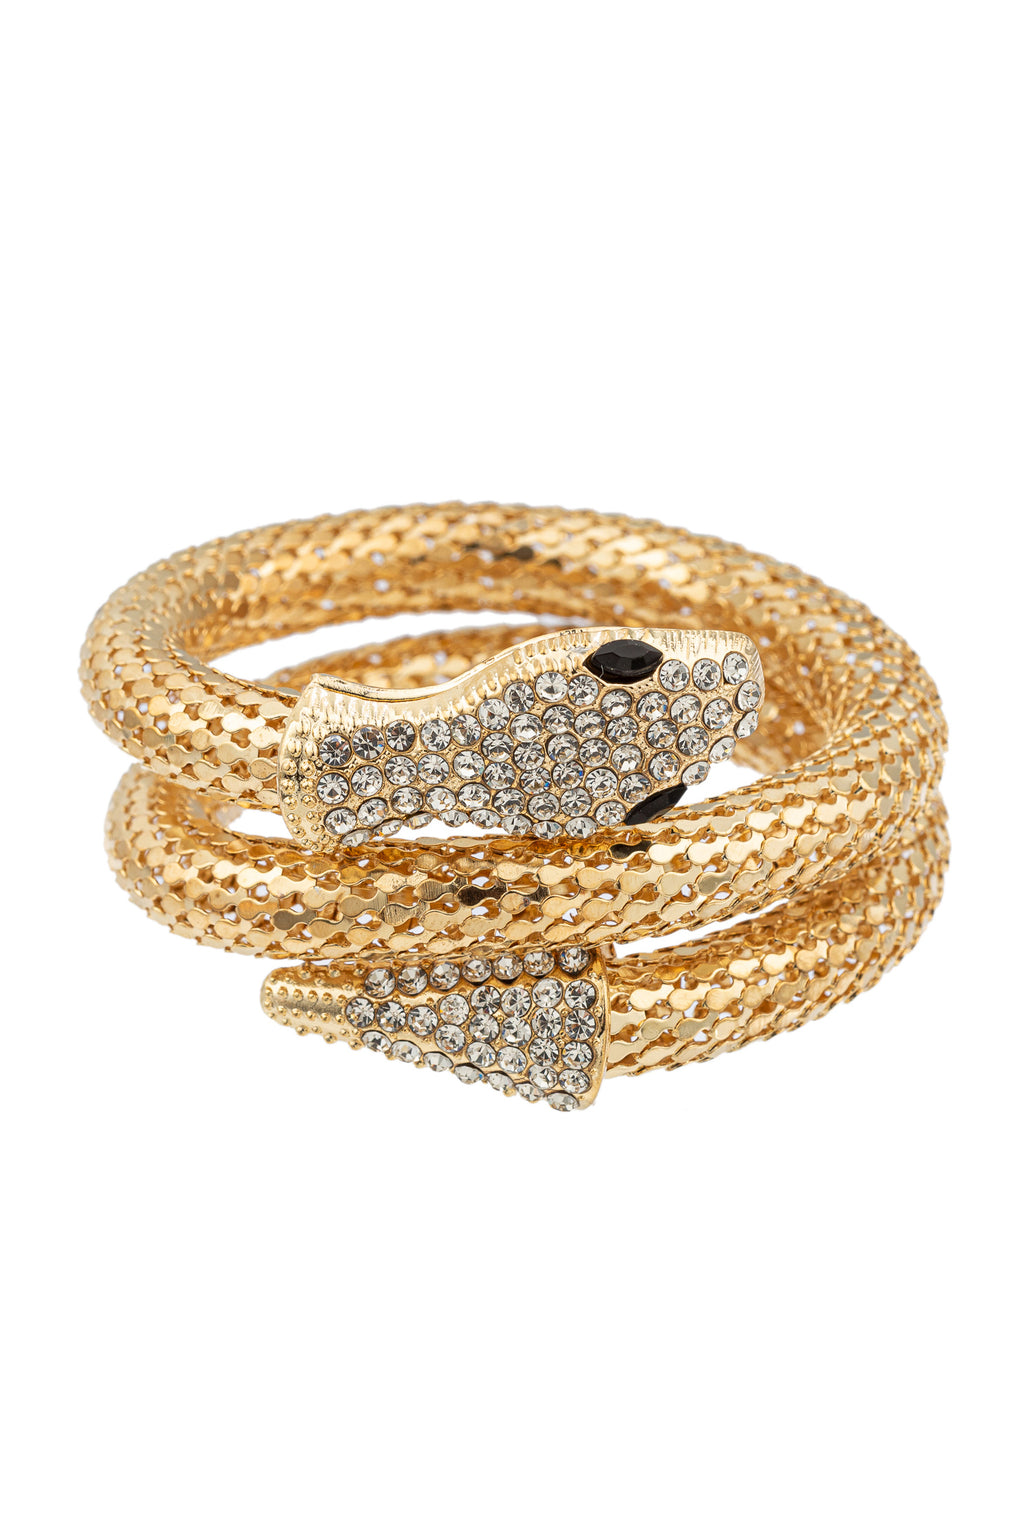 Gold tone alloy snake wrap bracelet studded with glass crystals.